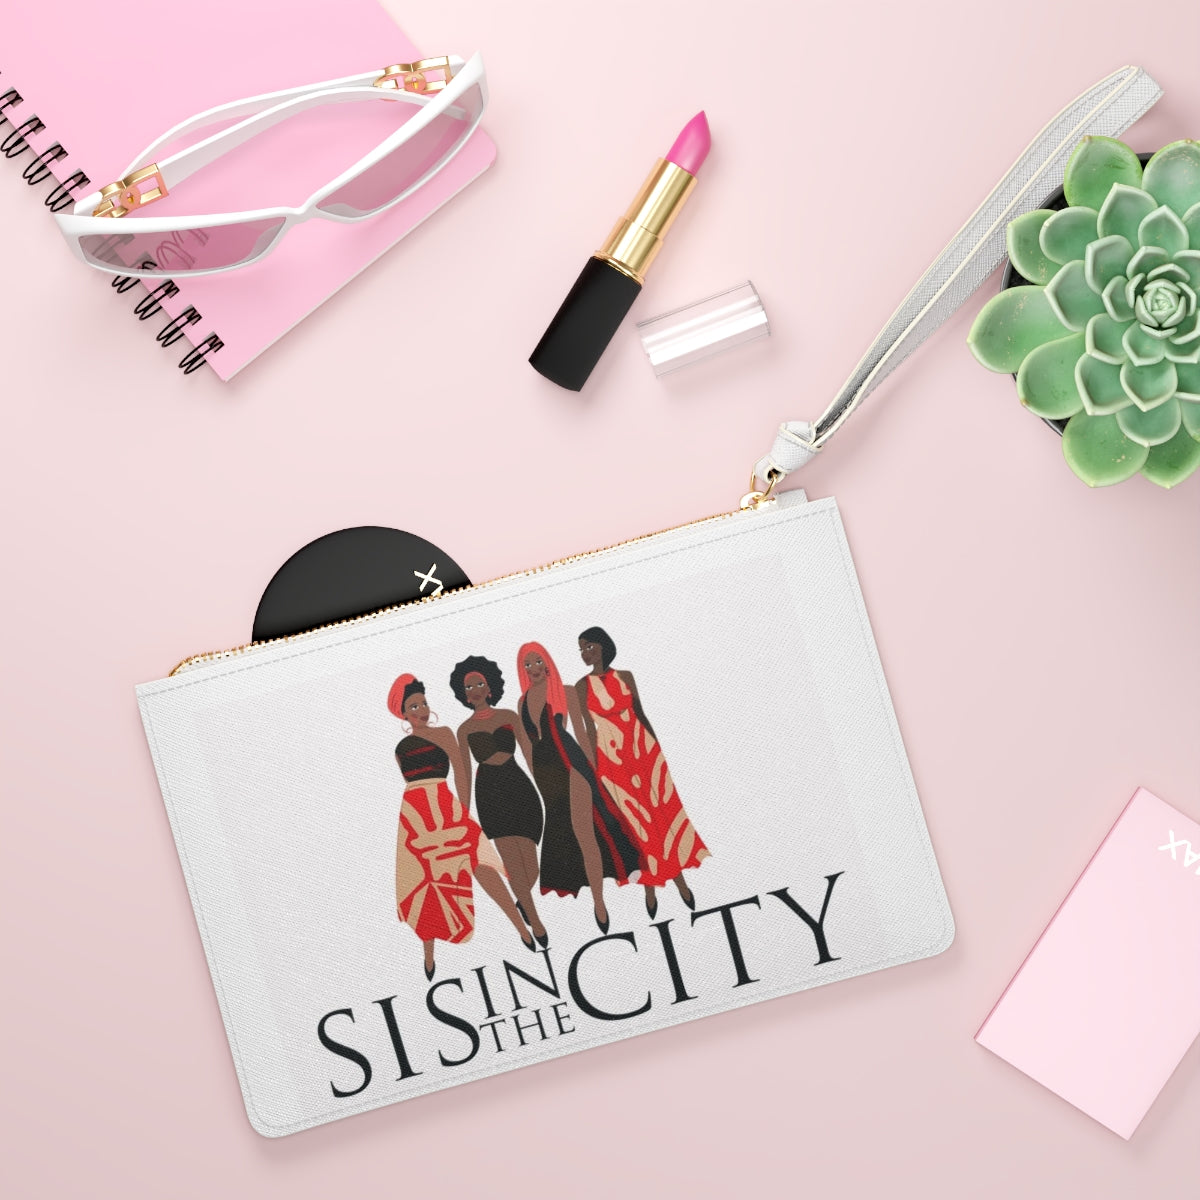 "Sis In The City" Delta Clutch Bag